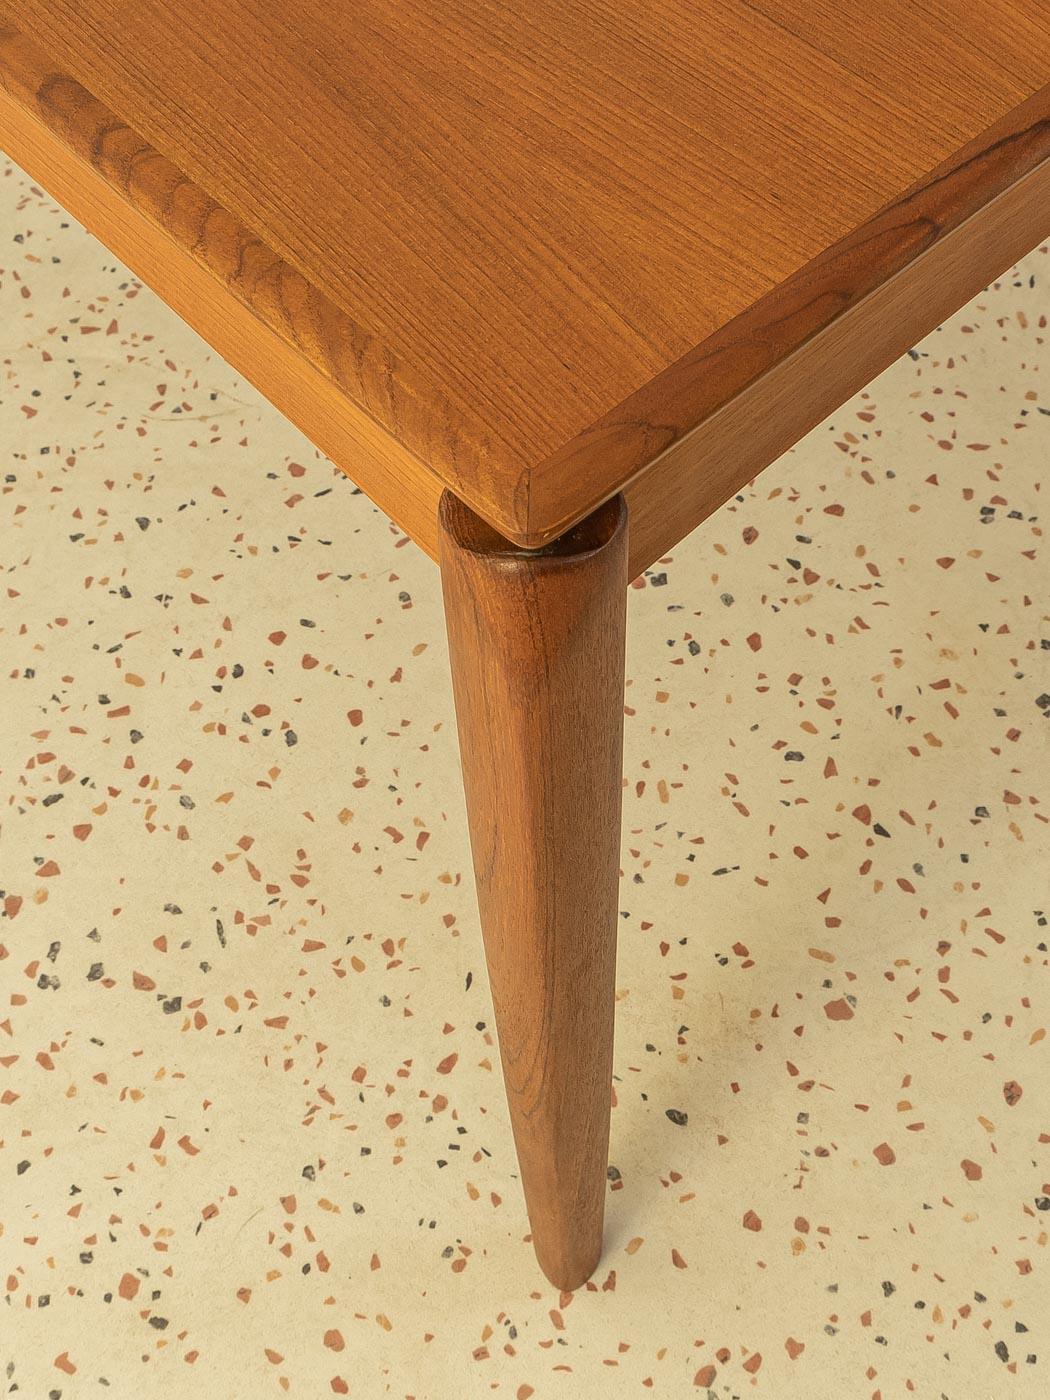 Mid-20th Century Extendable Teak Dining Table from the 1960s by H.W. Klein for Bramin, Denmark